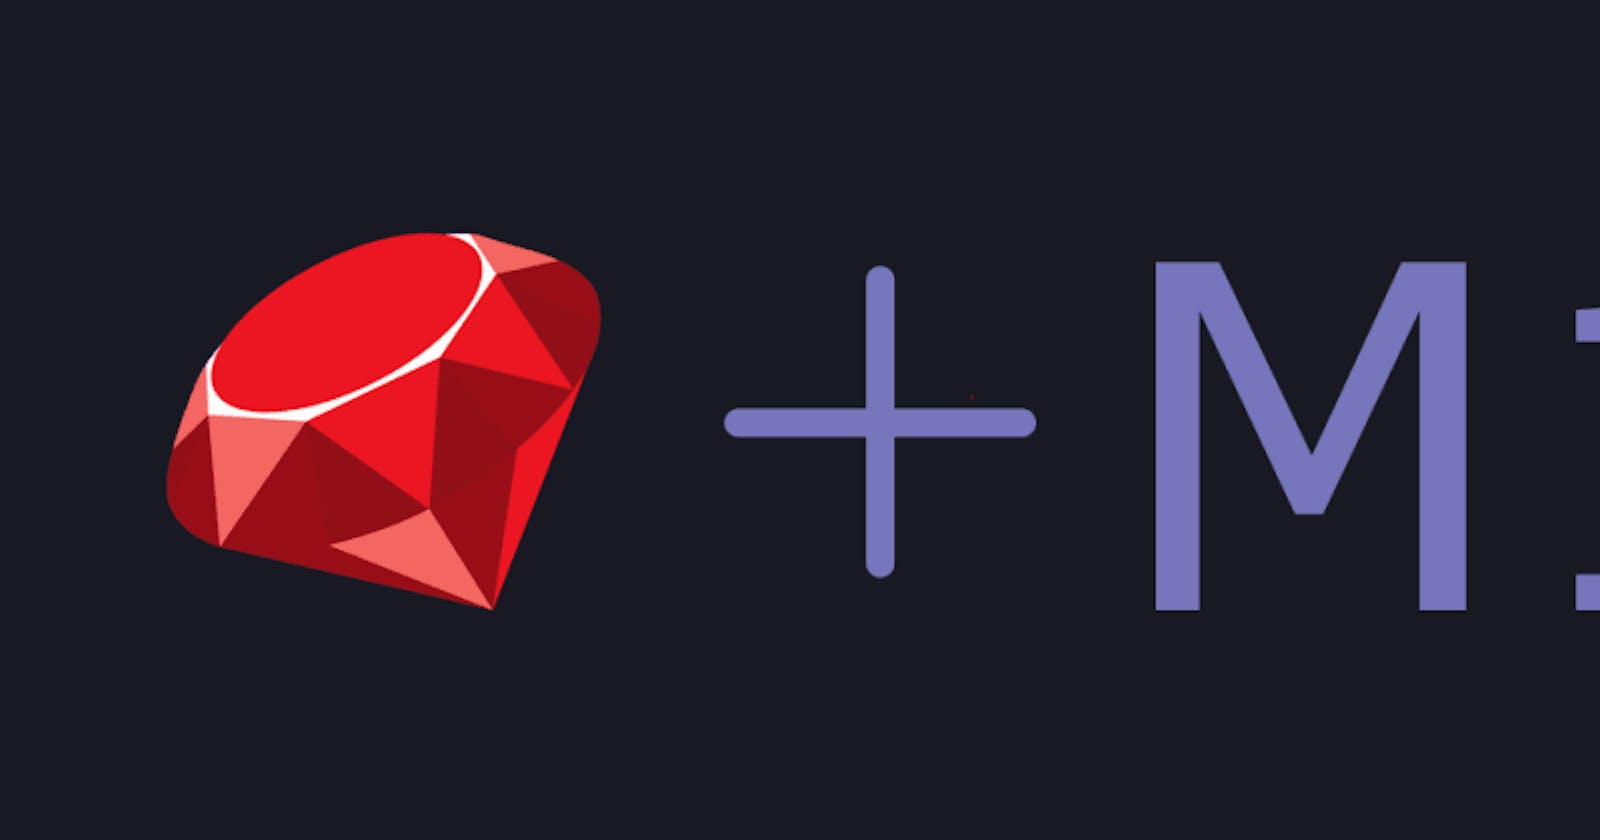 How to Install Ruby 2.7.3 on M1 Mac